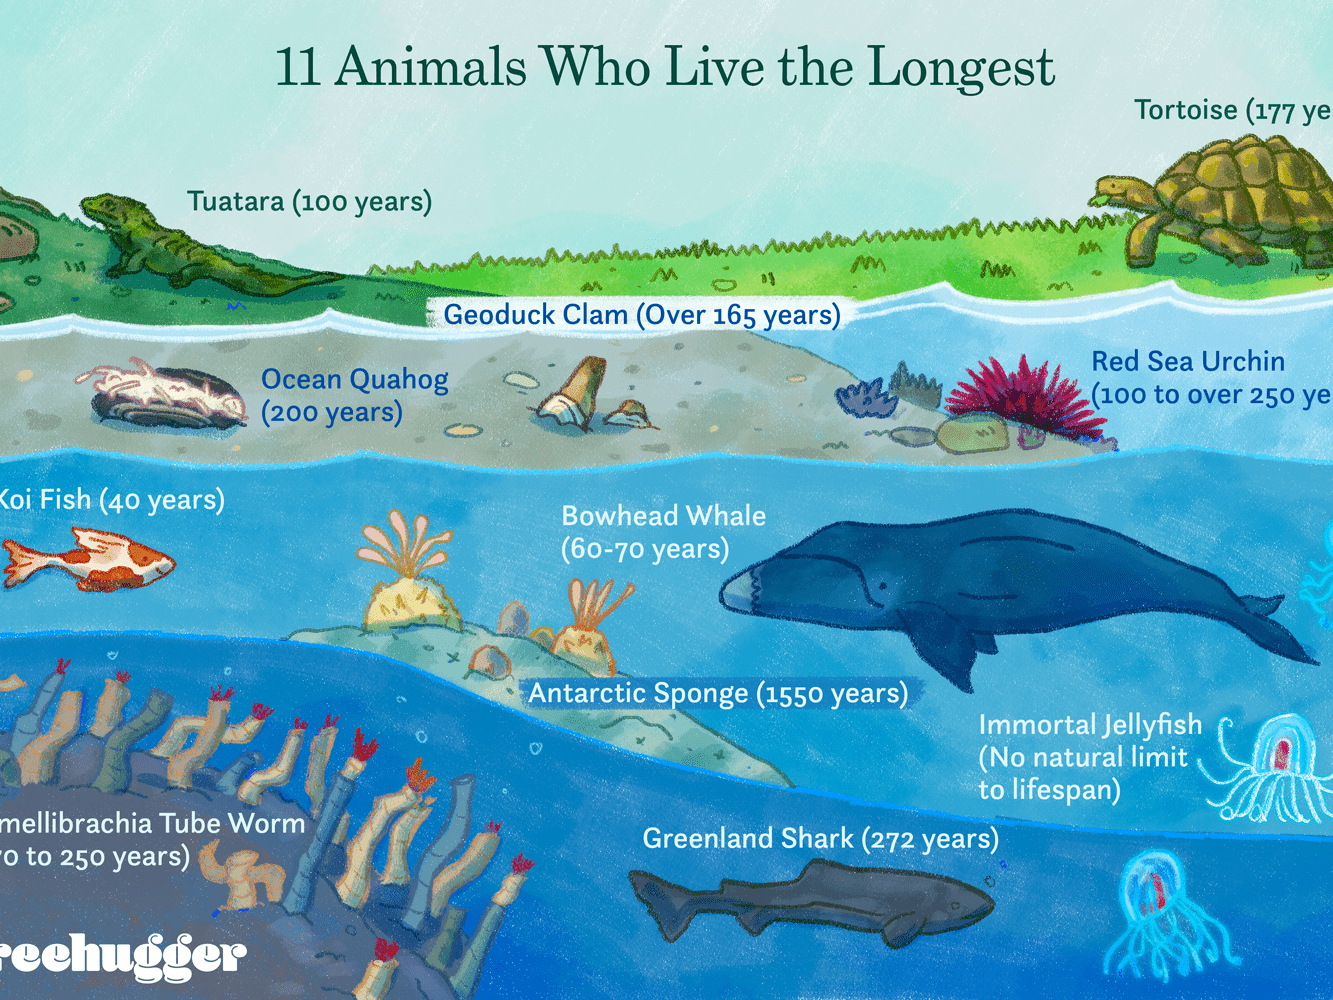 Which animal has highest life span?